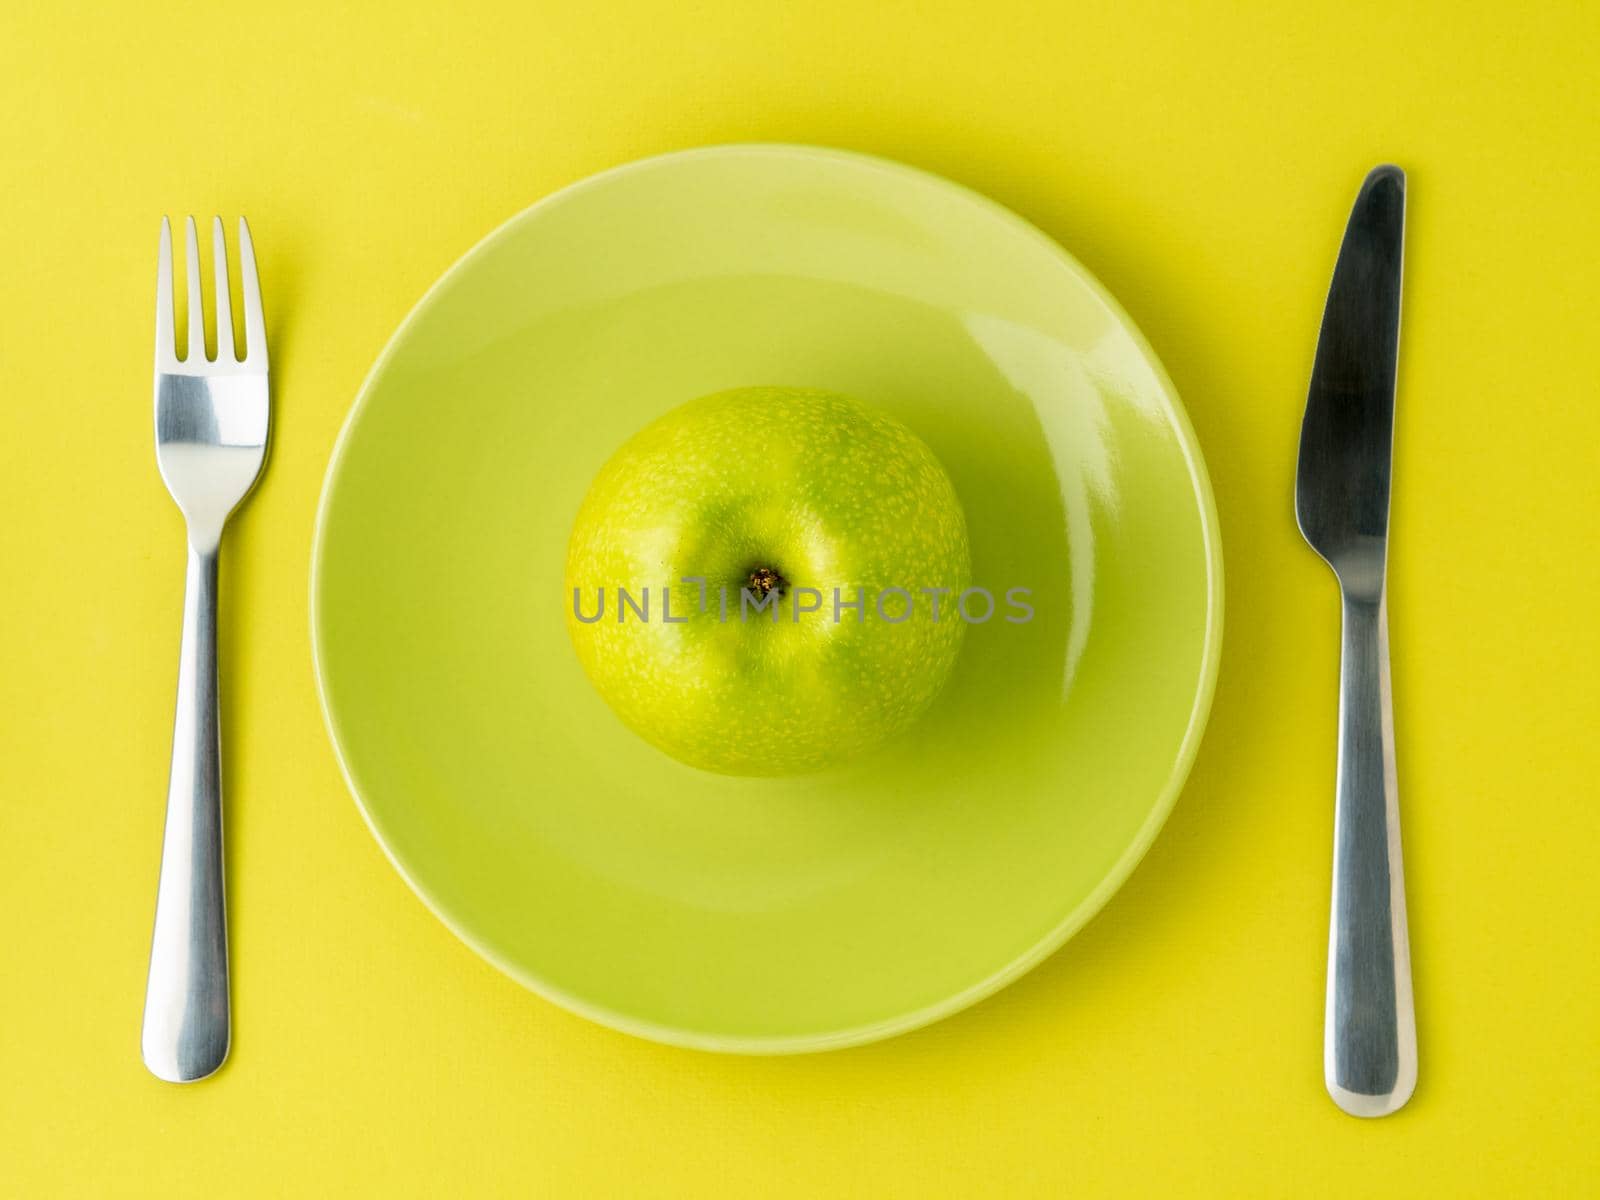 green ripe apples on a bright green plate, knife, fork on colorful yellow and green background, top view by NataBene